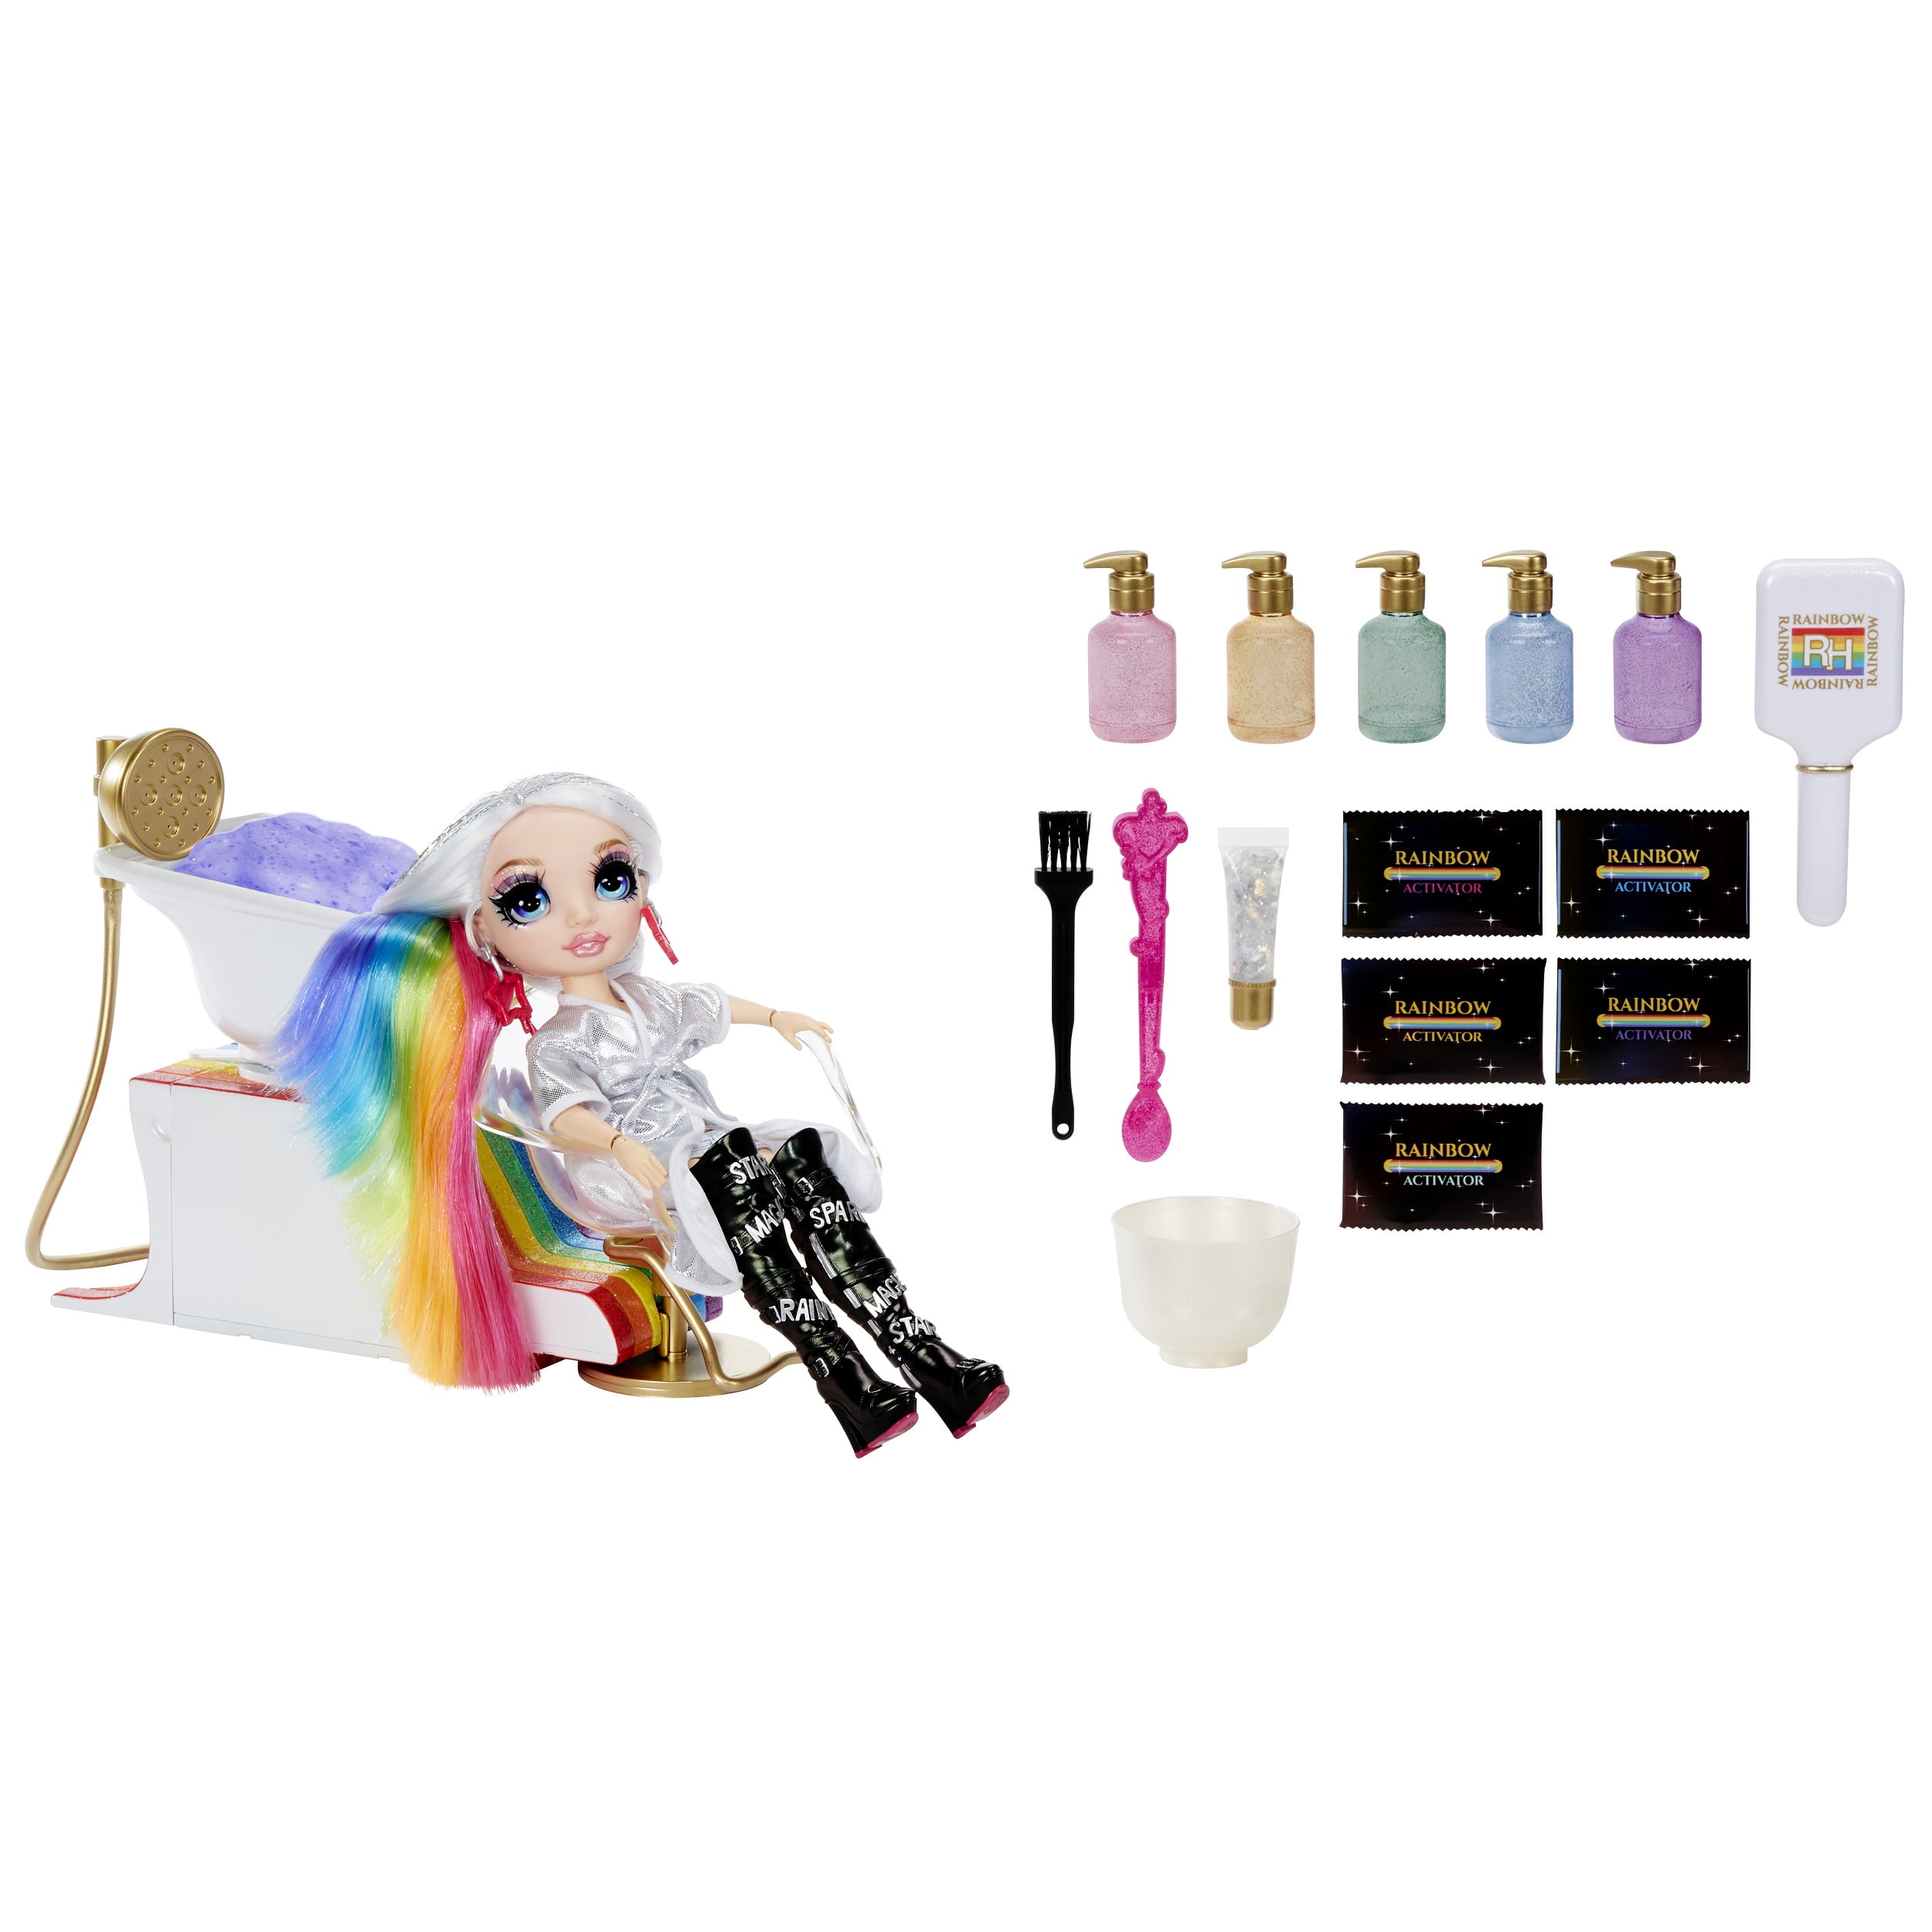 RAINBOW HIGH HAIR SALON, Unboxing and Review